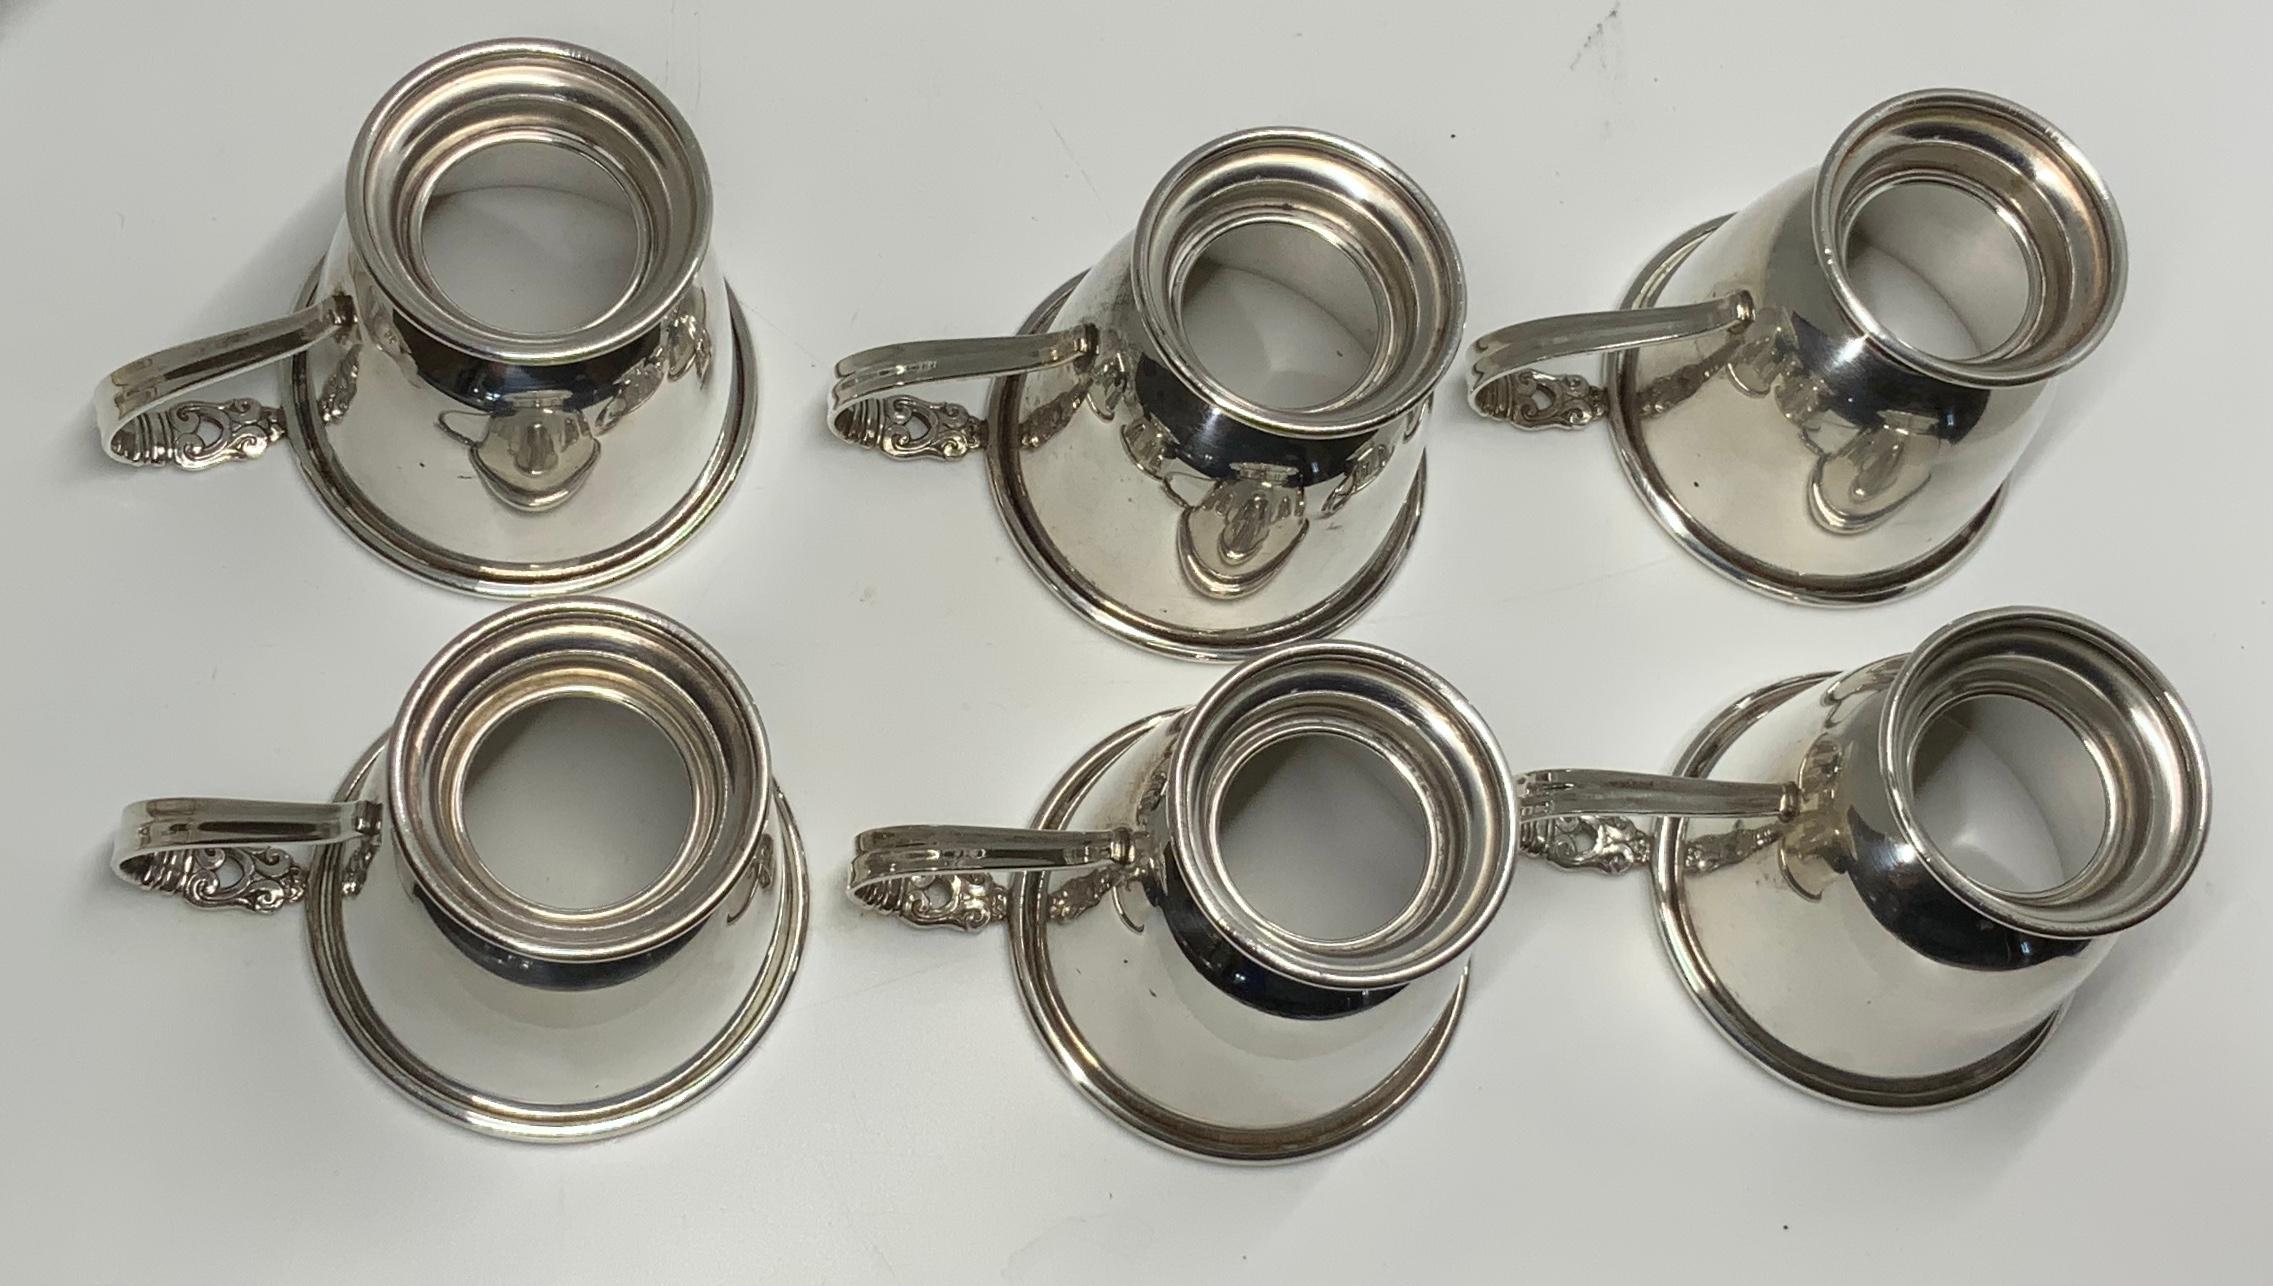 American Set of Six International Sterling Silver Cup Holders, Saucers and Lenox Liners